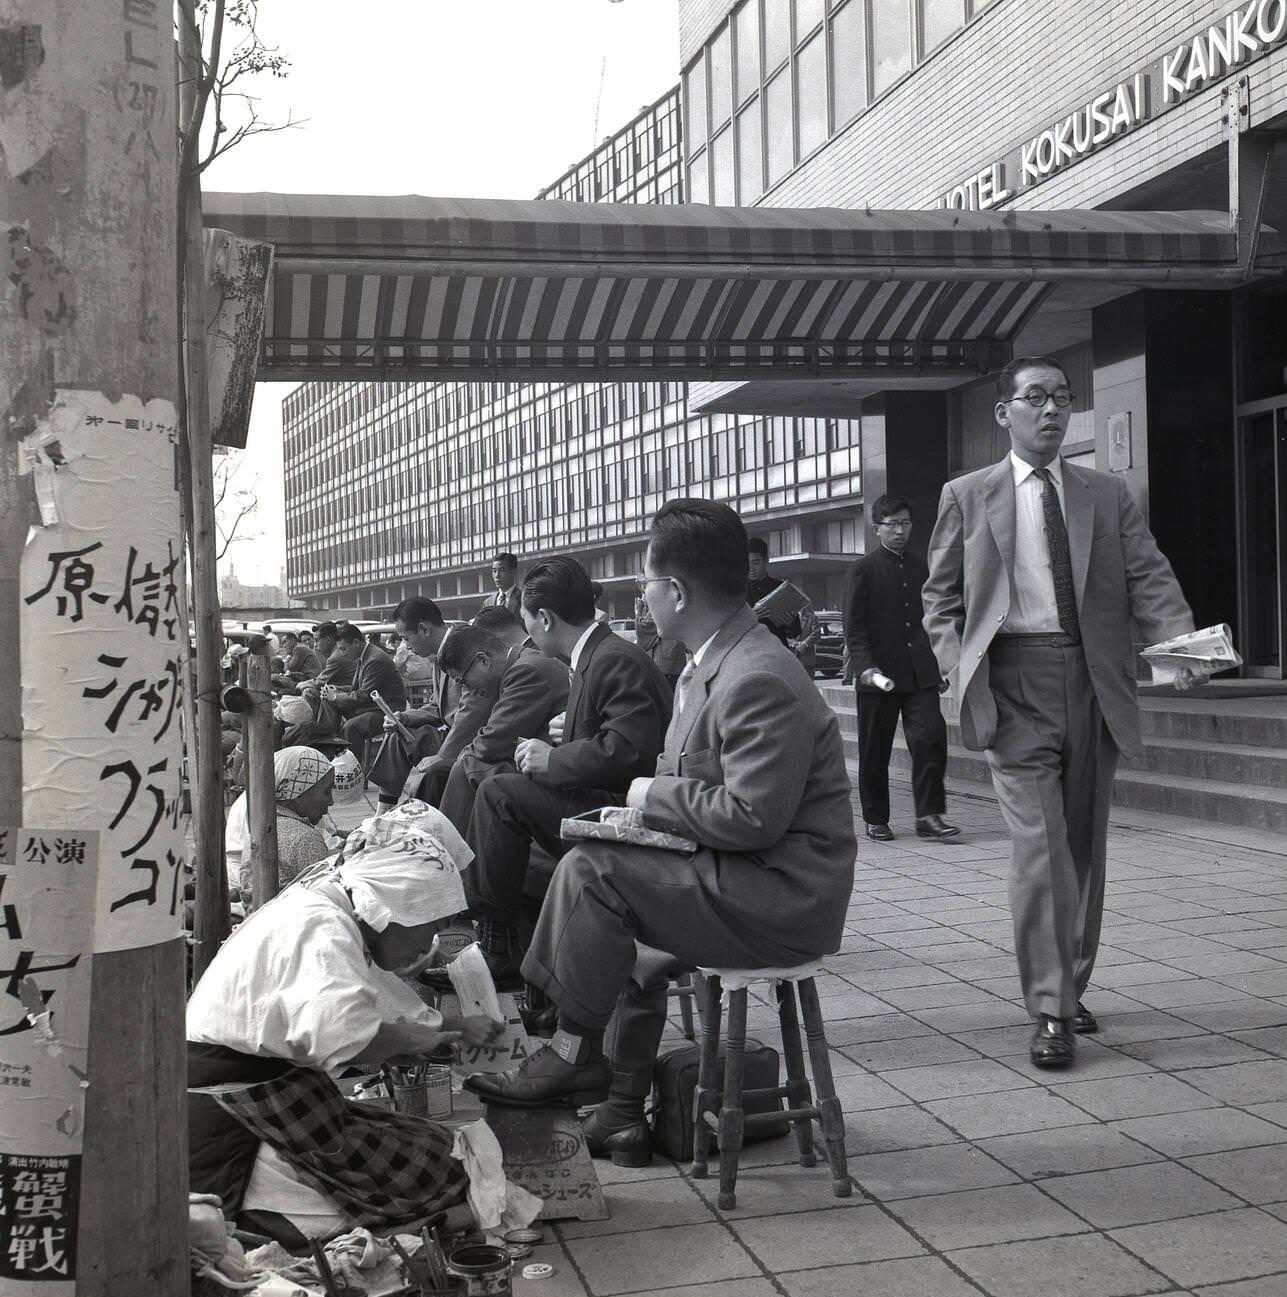 Japanese businessmen sit on little stools having their shoes polished and cleaned, 1950s.